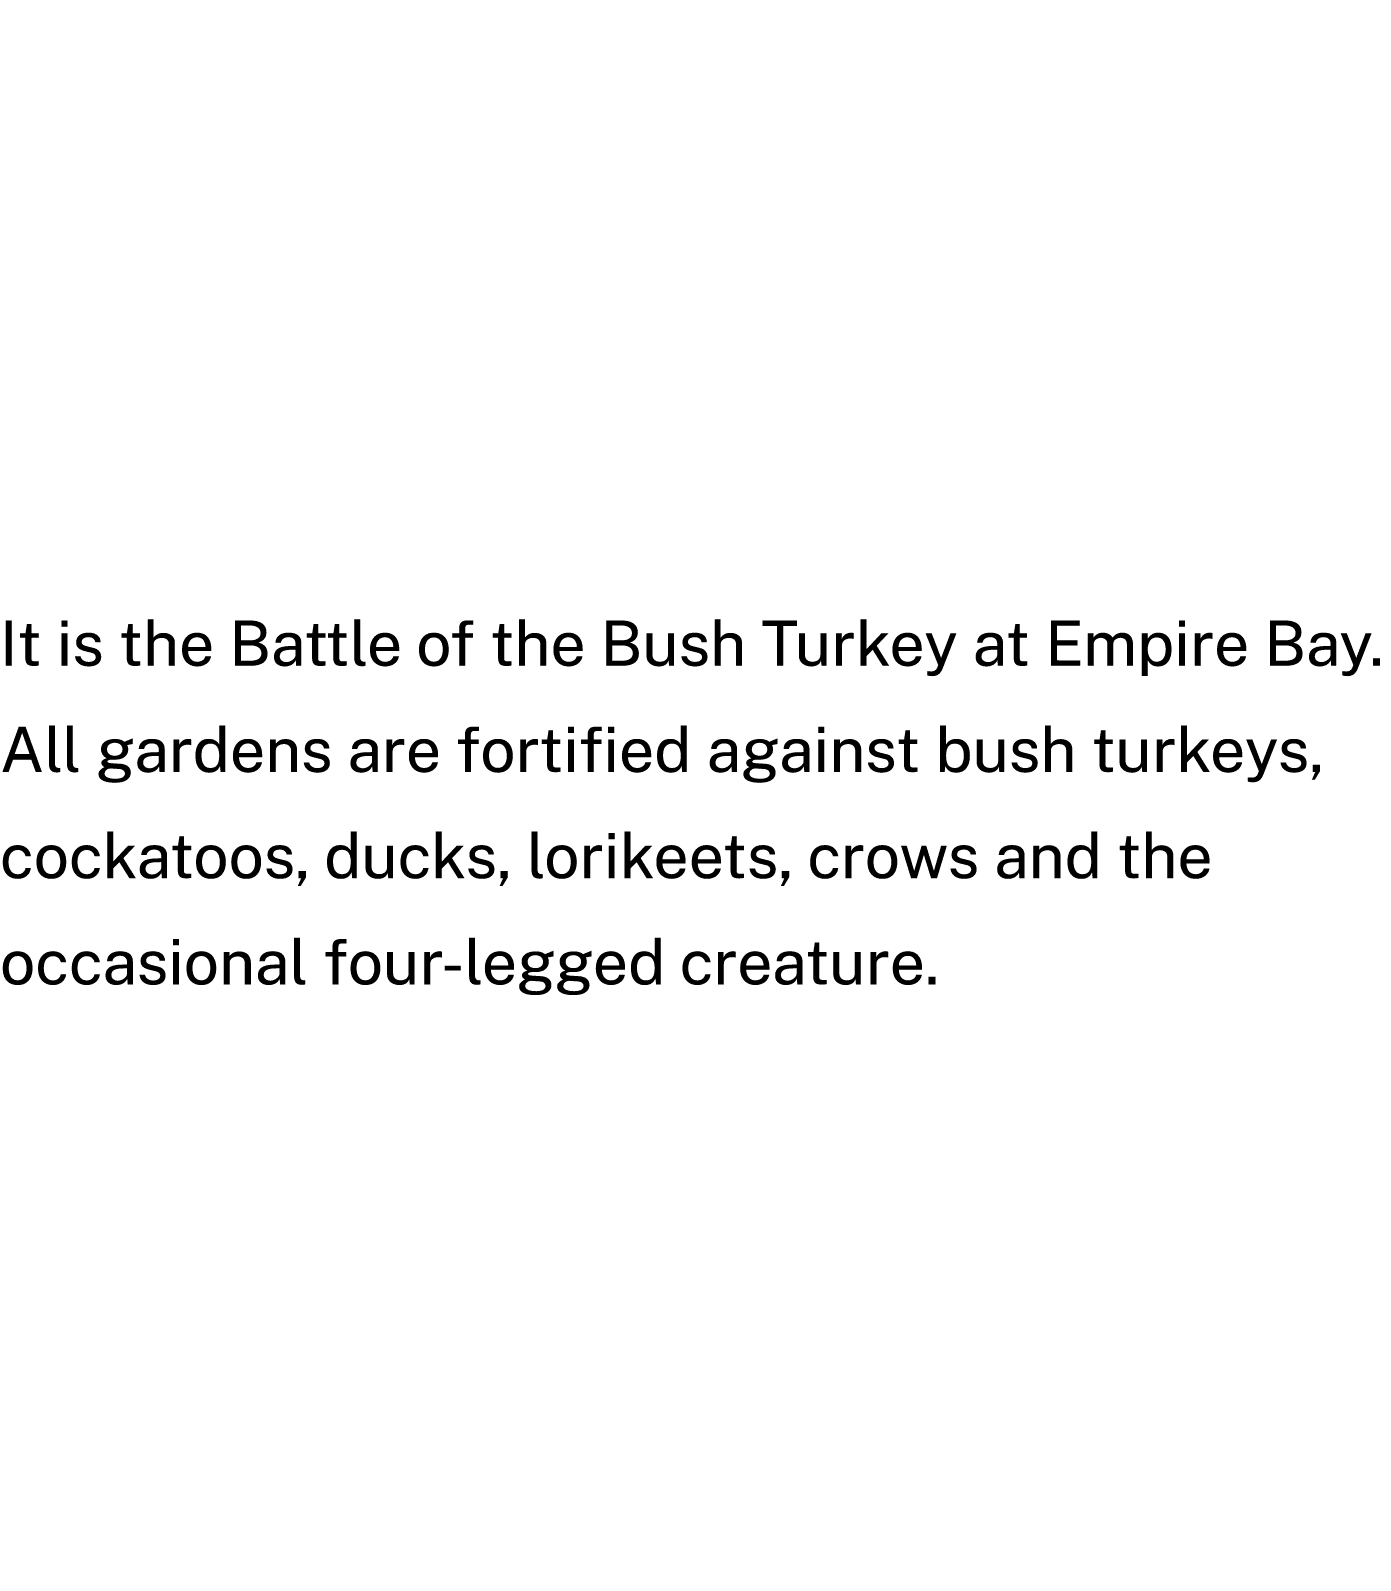 It is the Battle of the Bush Turkey at Empire Bay. All gardens are fortified against bush turkeys, cockatoos, ducks, ...